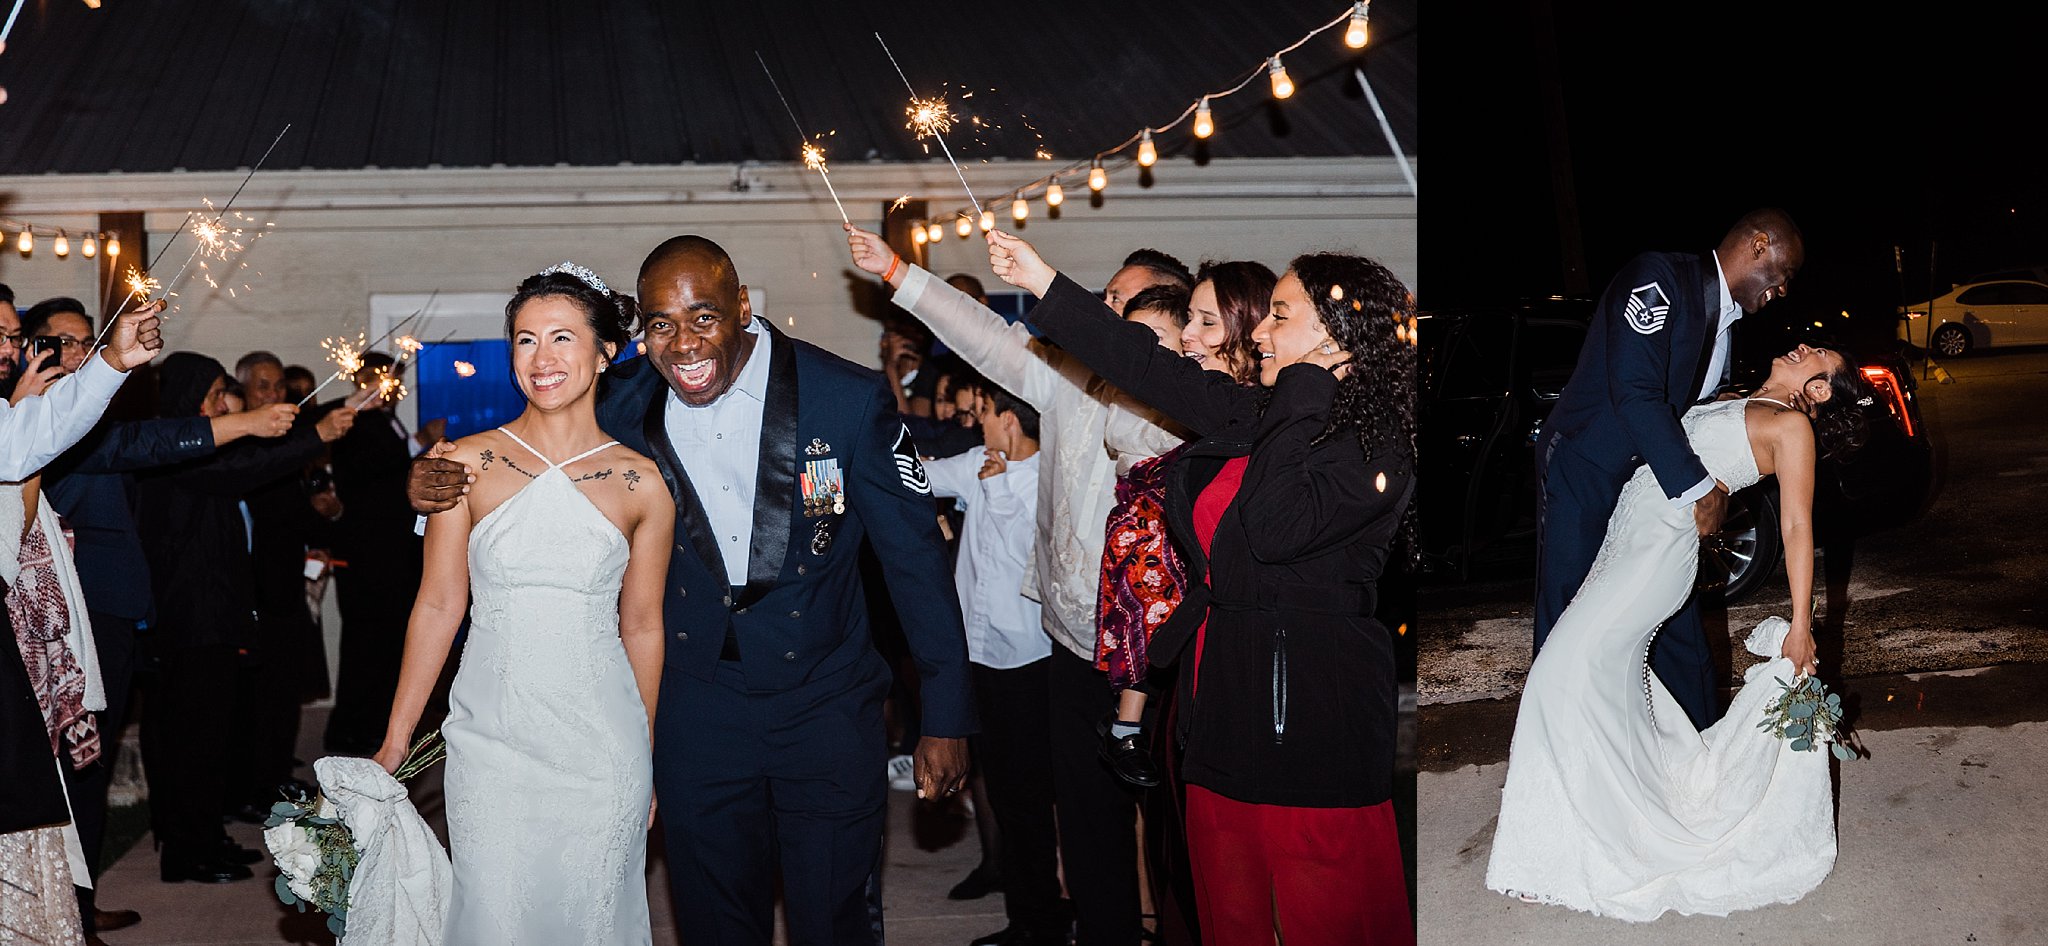 Air Force Newlyweds Making Wedding Grand Exit with Sparklers